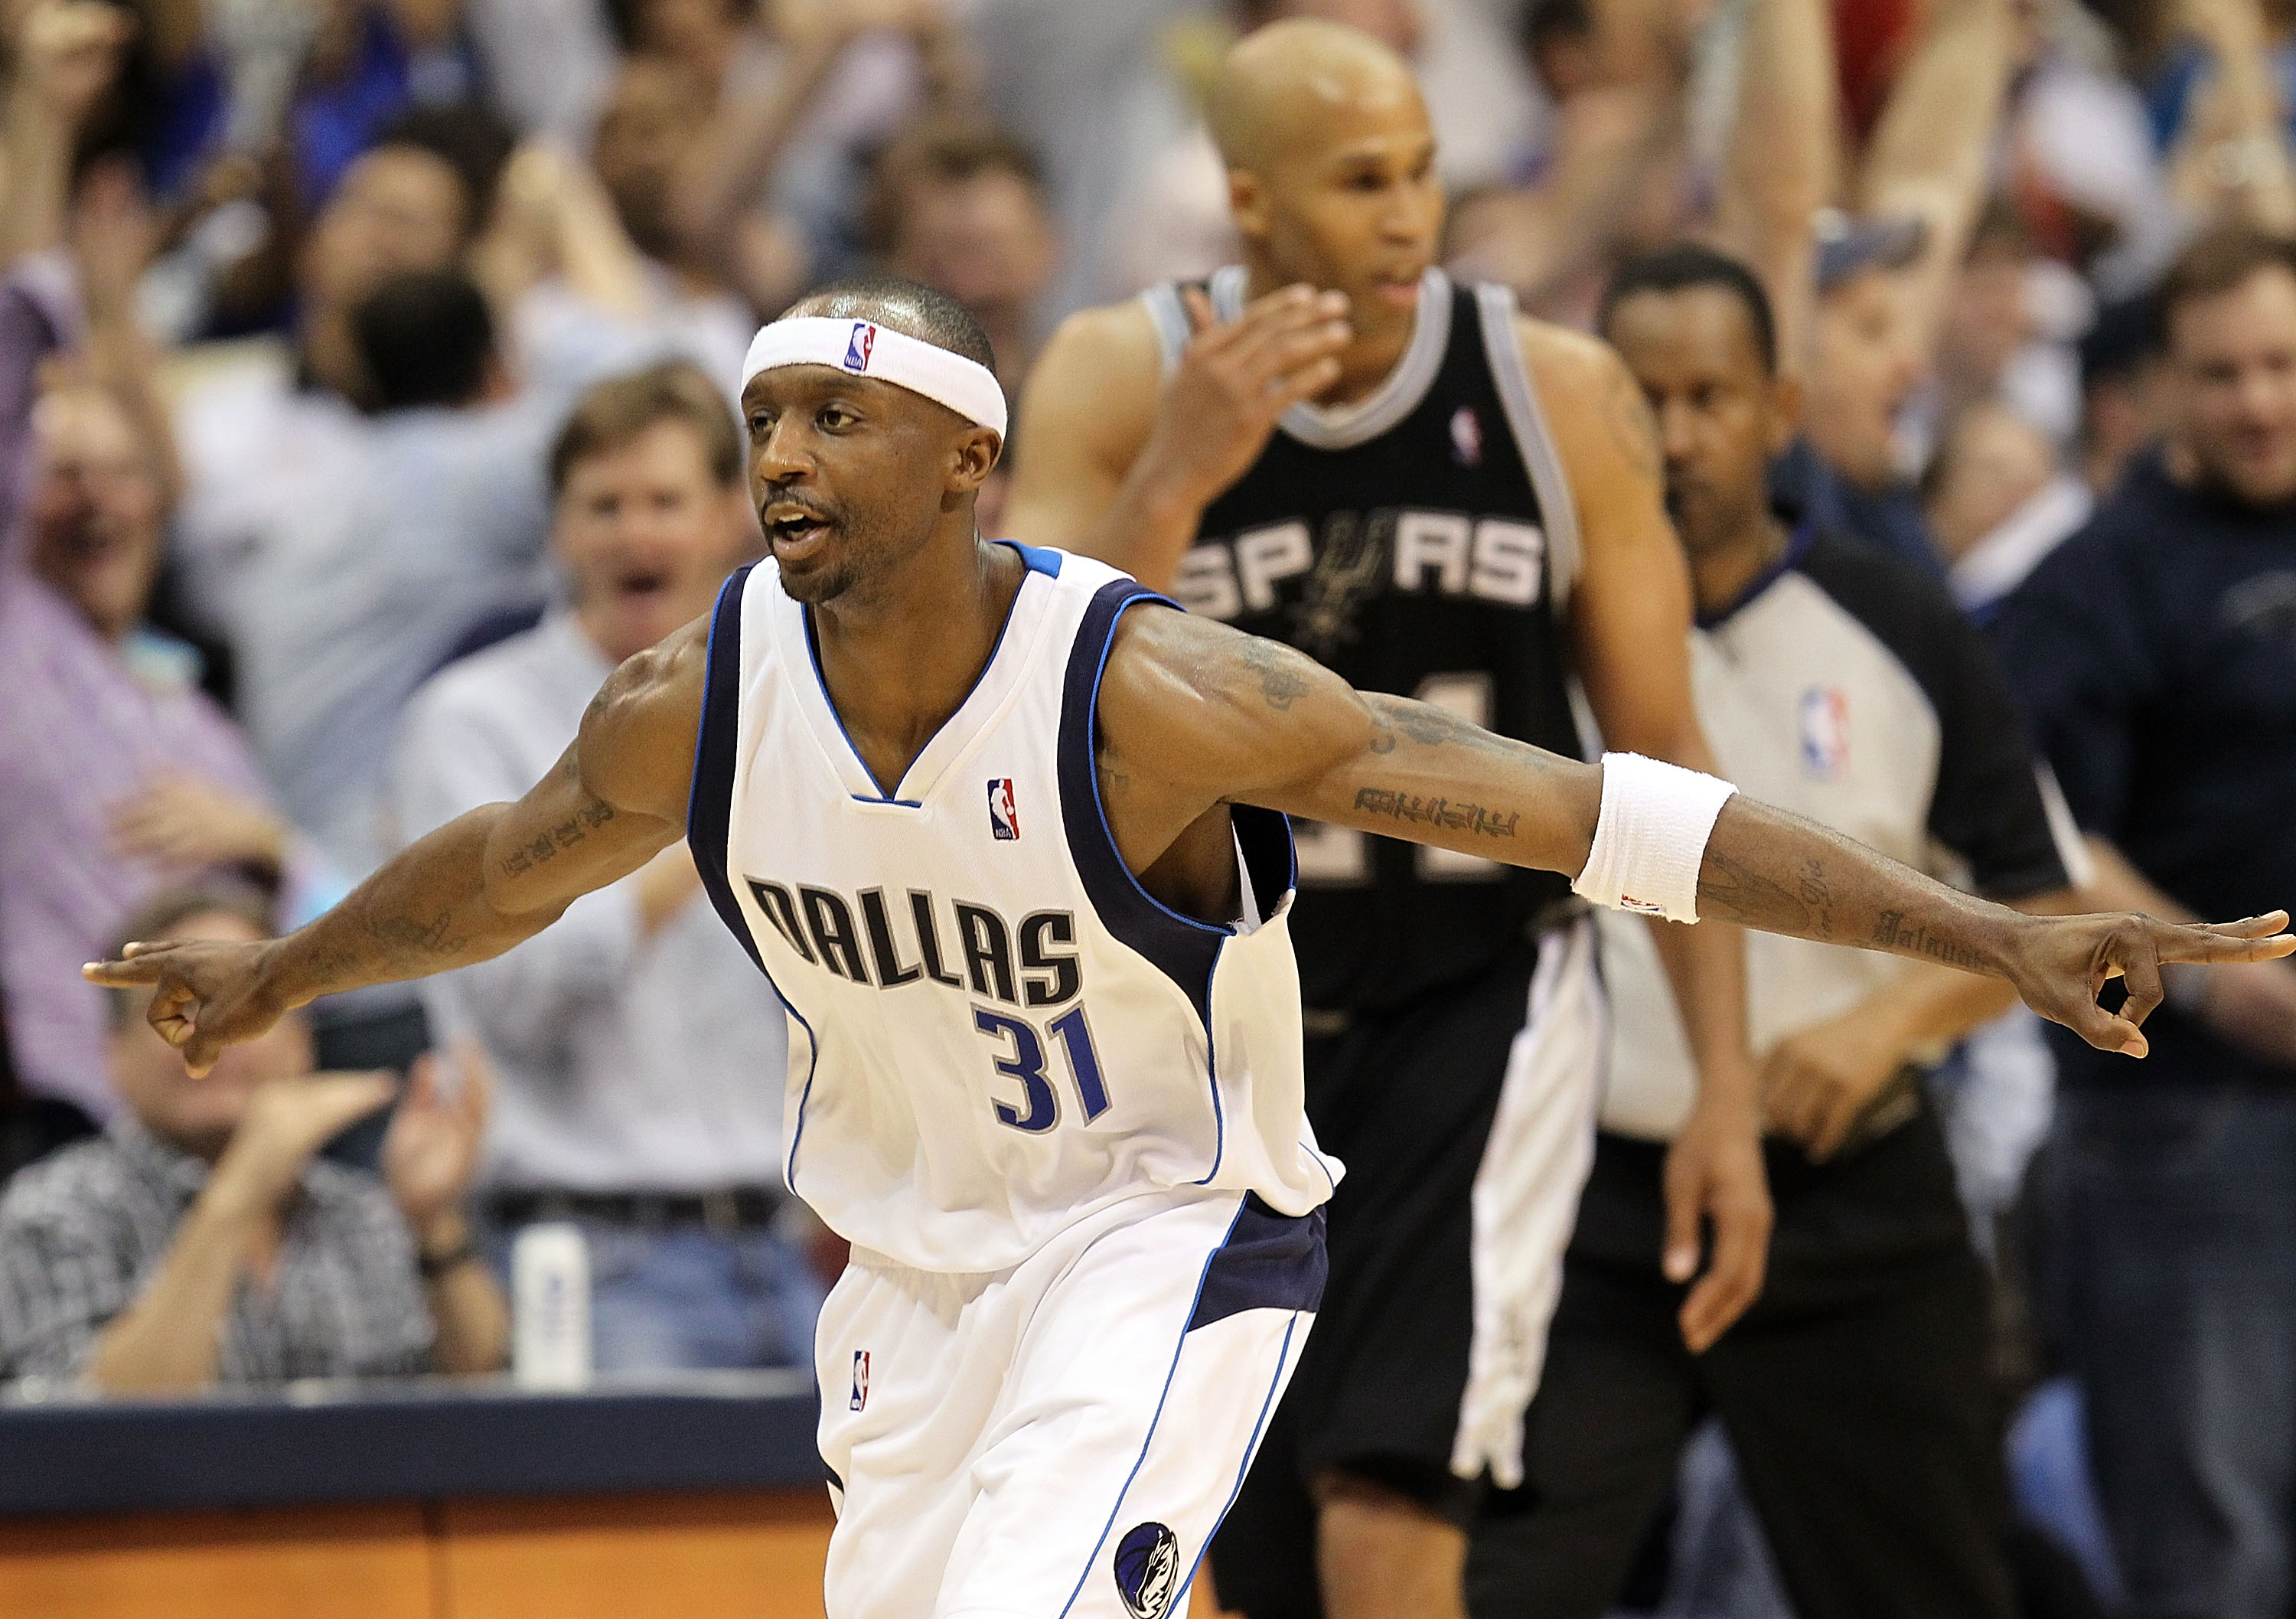 DALLAS - APRIL 21:  Guard Jason Terry #31 of the Dallas Mavericks reacts after scoring a three point shot against the San Antonio Spurs in Game Two of the Western Conference Quarterfinals during the 2010 NBA Playoffs at American Airlines Center on April 2